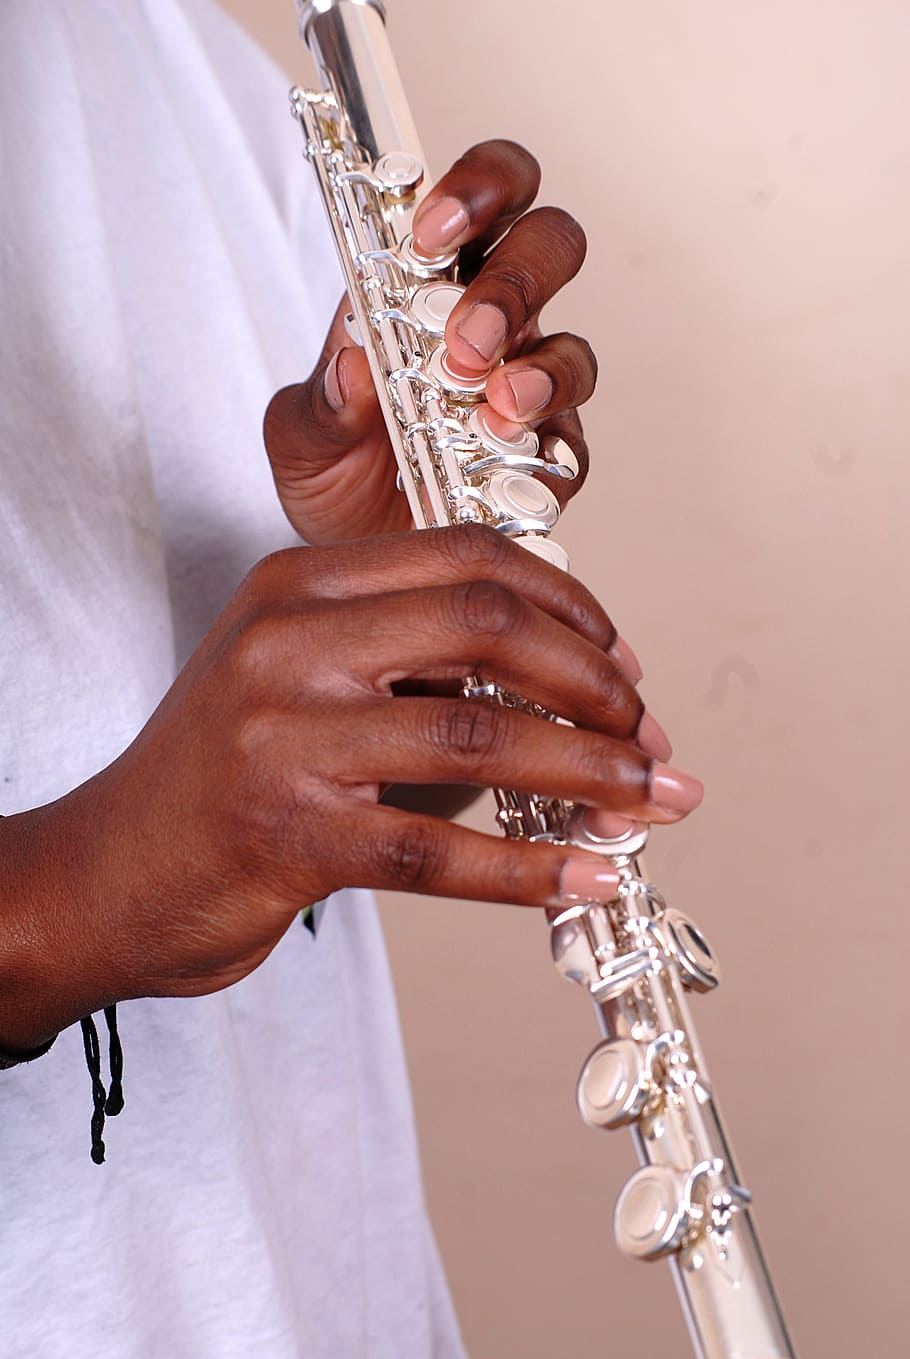 flute, silver, playing, instrument, flutist, female, hand, shiny, performer, professional